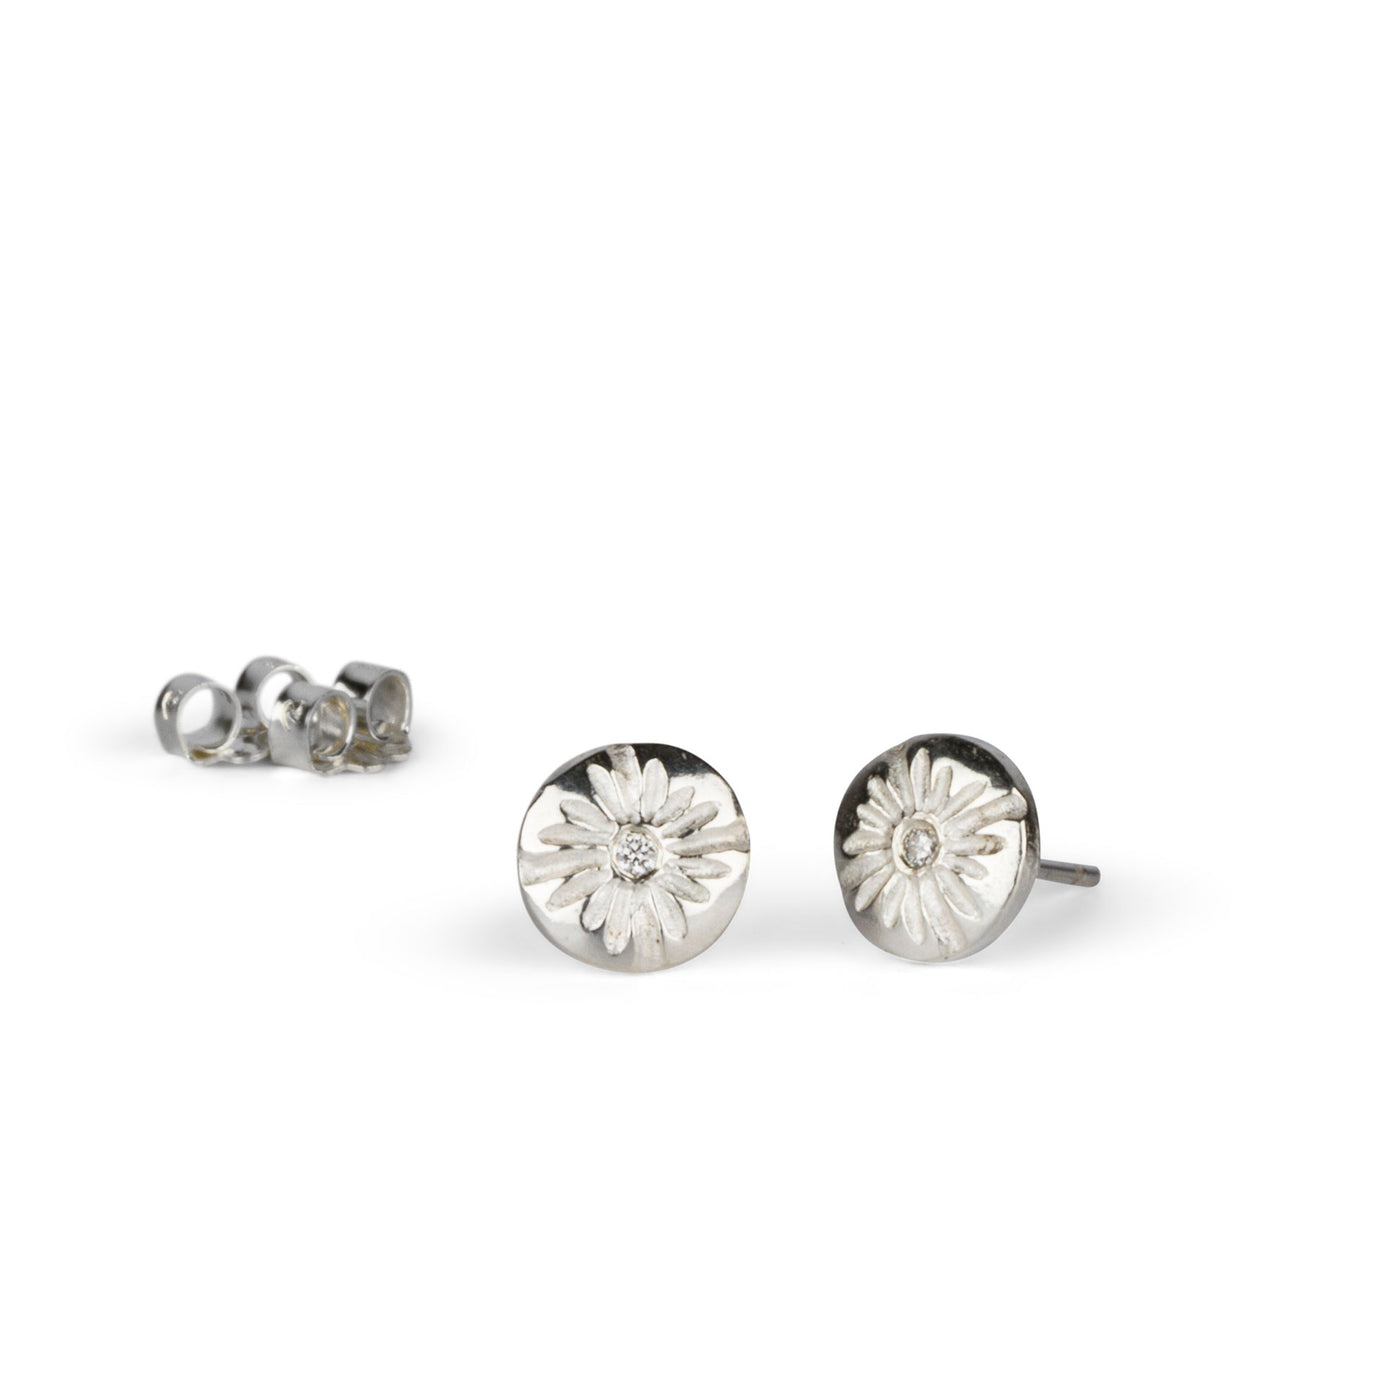 Small Lucia Diamond Stud Earrings on a white background side view by Corey Egan